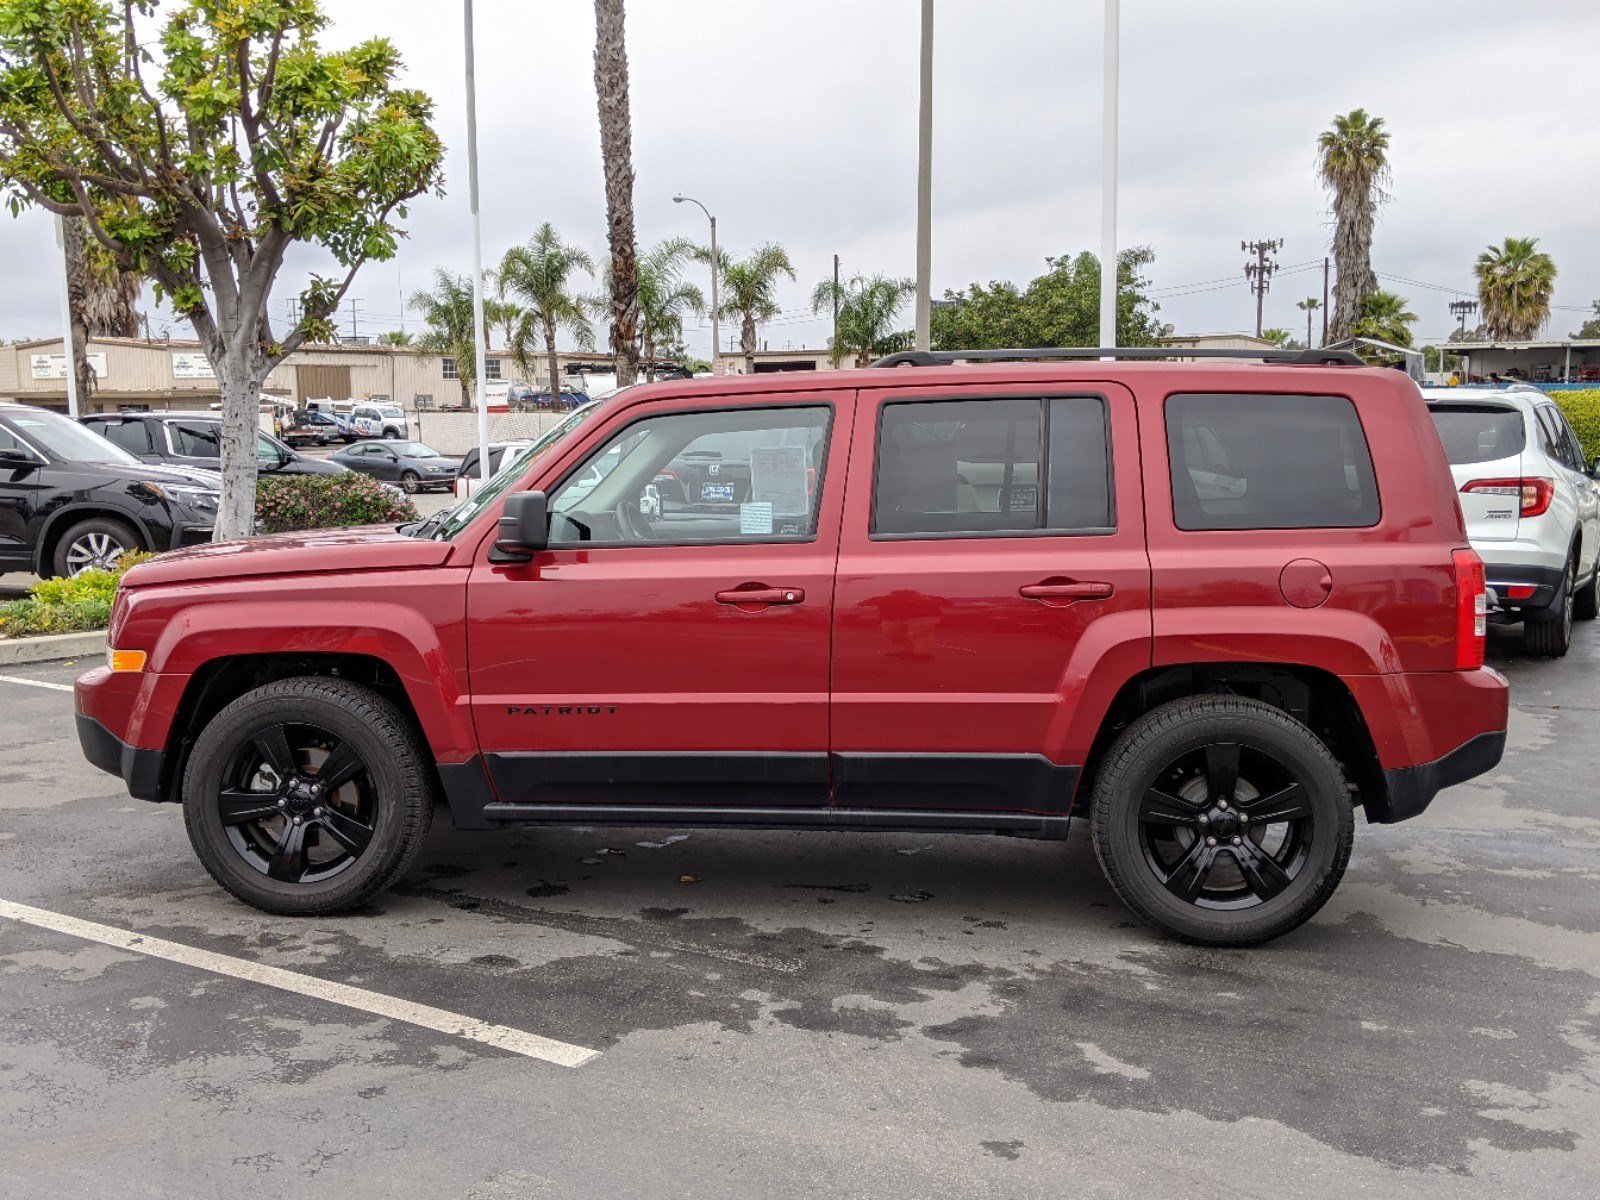 PreOwned 2014 Jeep Patriot Altitude Sport Utility in